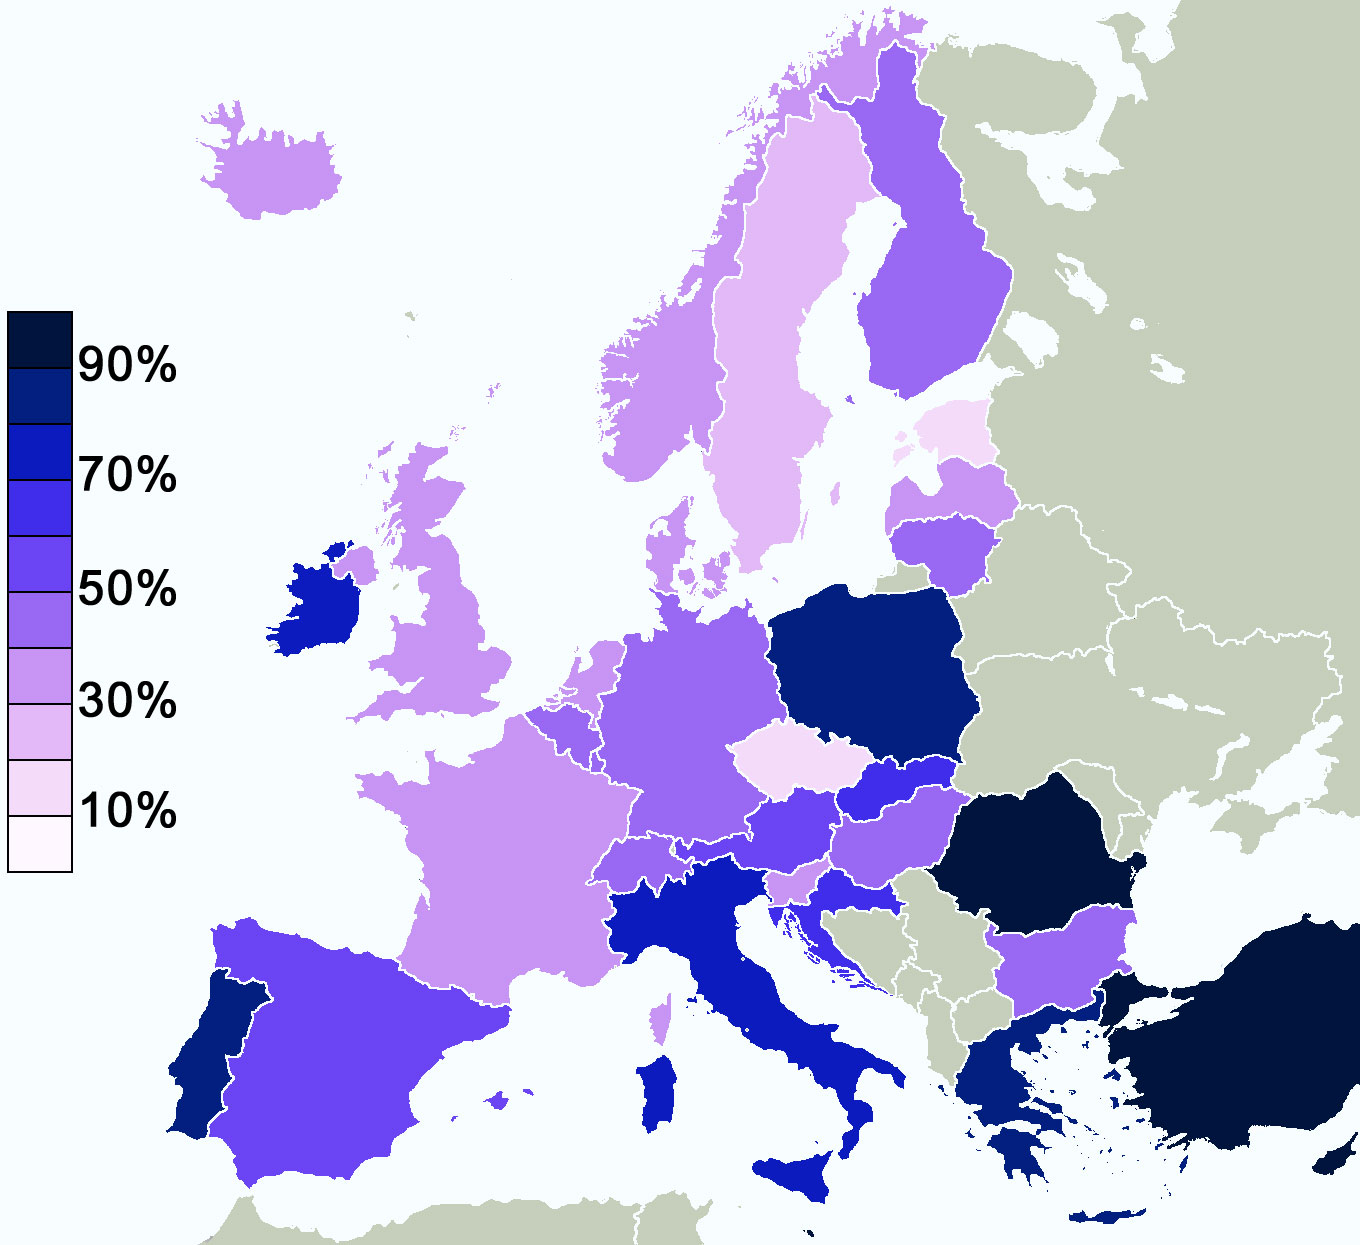 A map of the percentage of people believing in God in Europe.